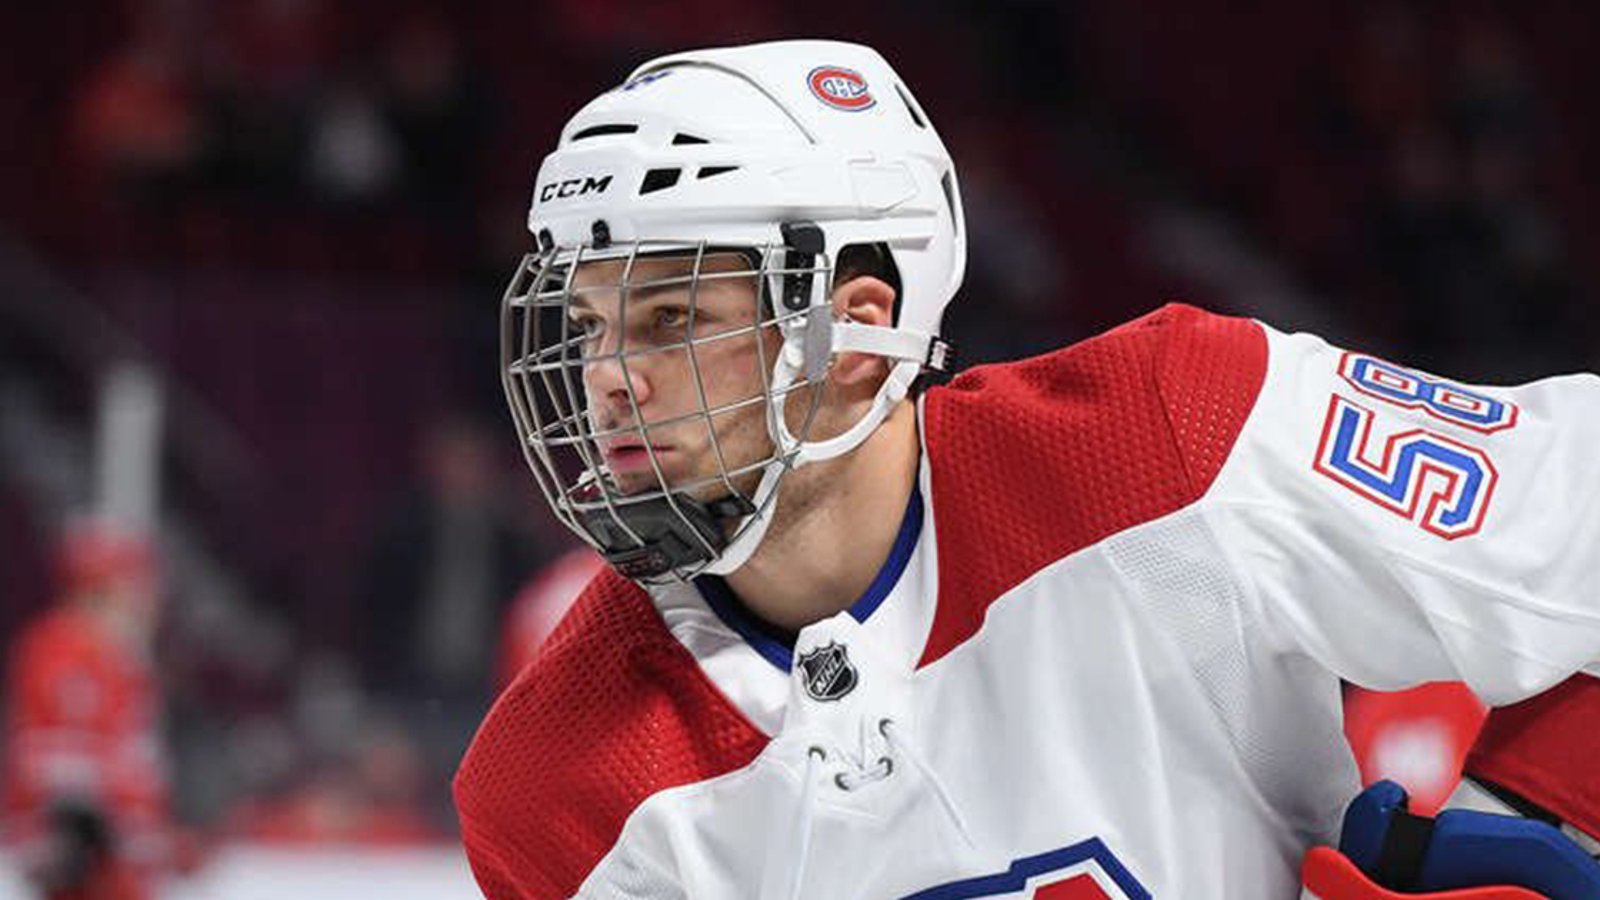 Report: Habs decline to confirm whether or not top prospect has career ending injury